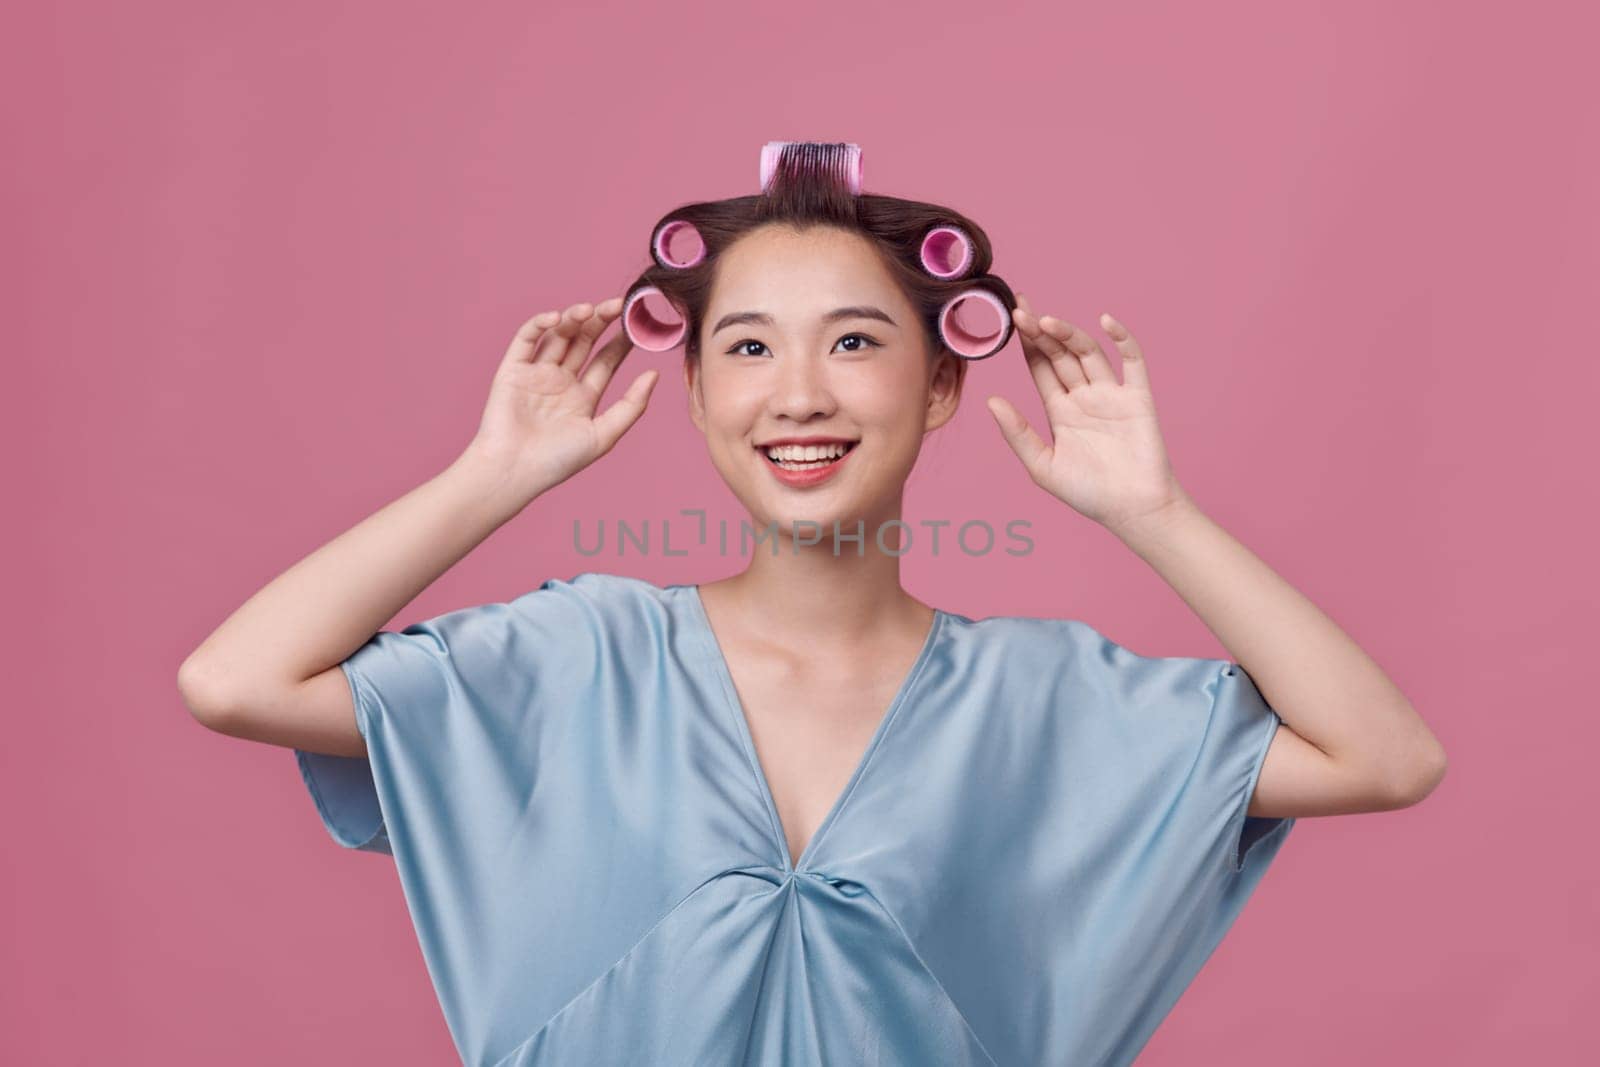 Headshot of a young woman with hair curlers over pink background